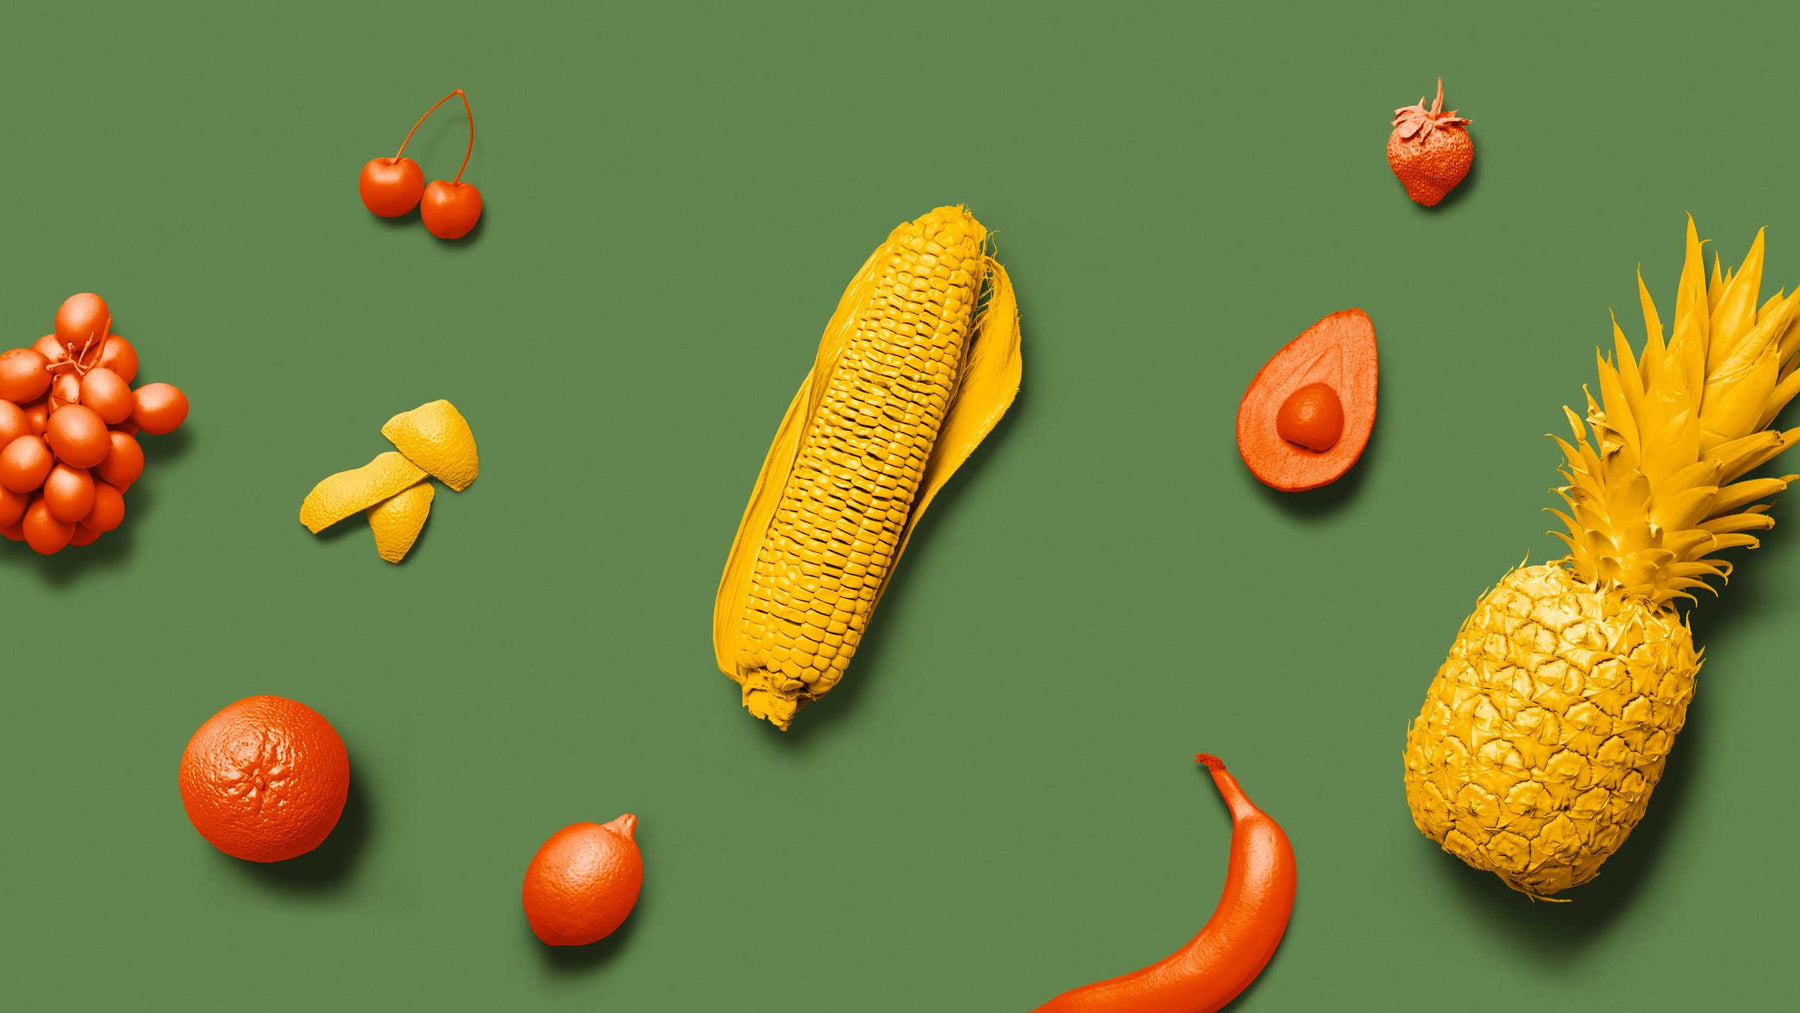 Fruits and vegetables against green background